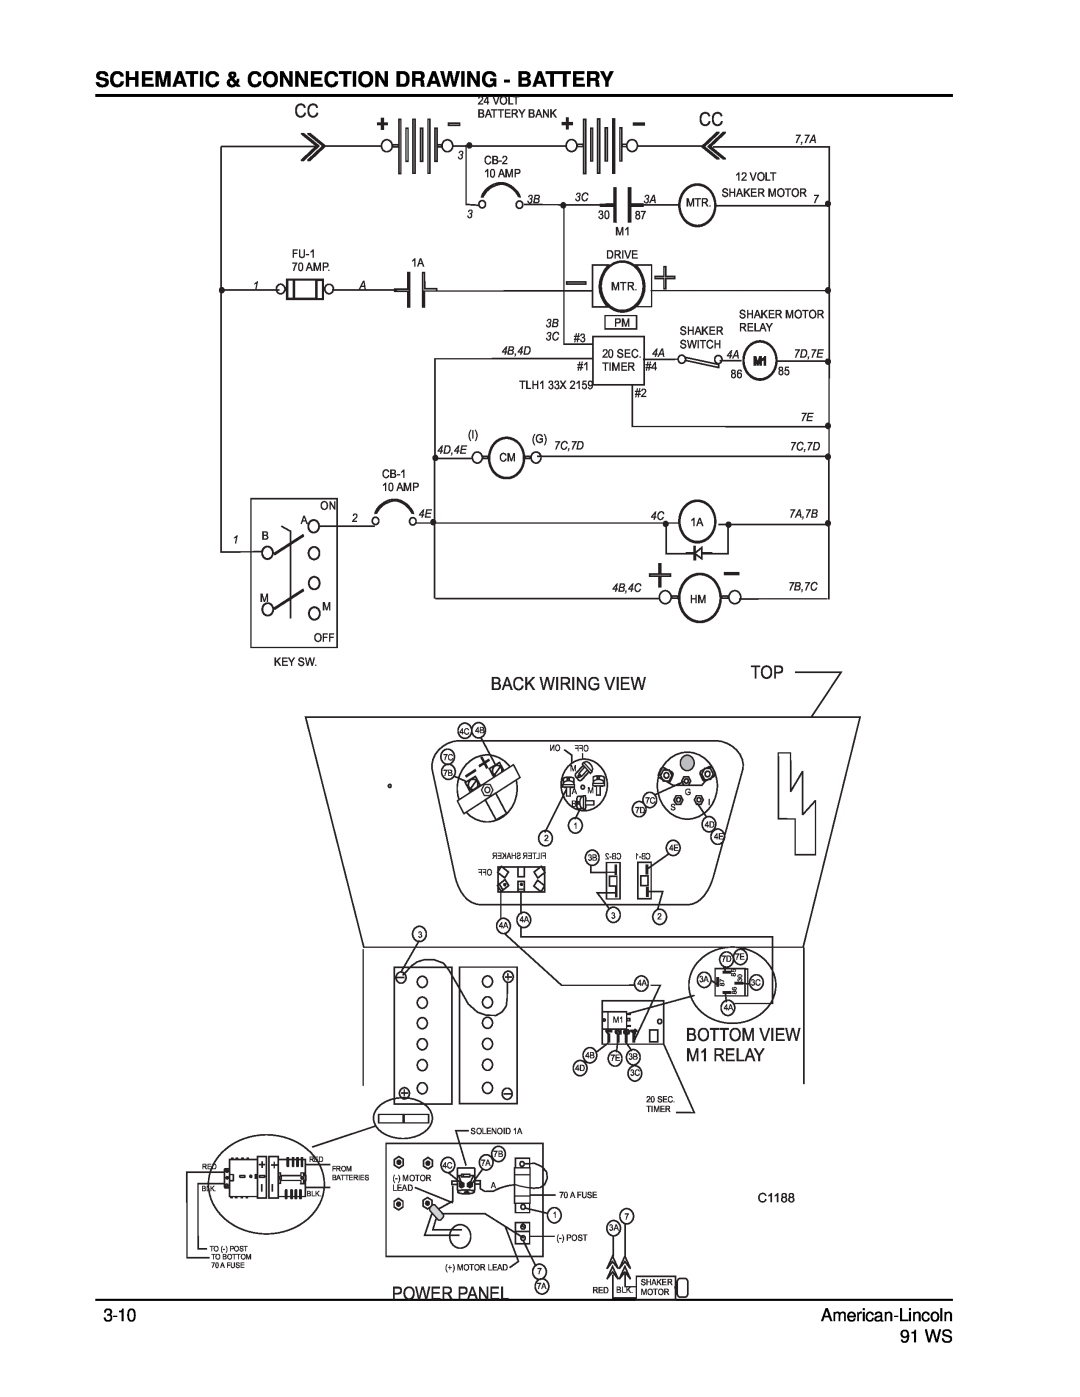 Nilfisk-ALTO 91WS manual Schematic & Connection Drawing - Battery, Top Back Wiring View, Power Panel 